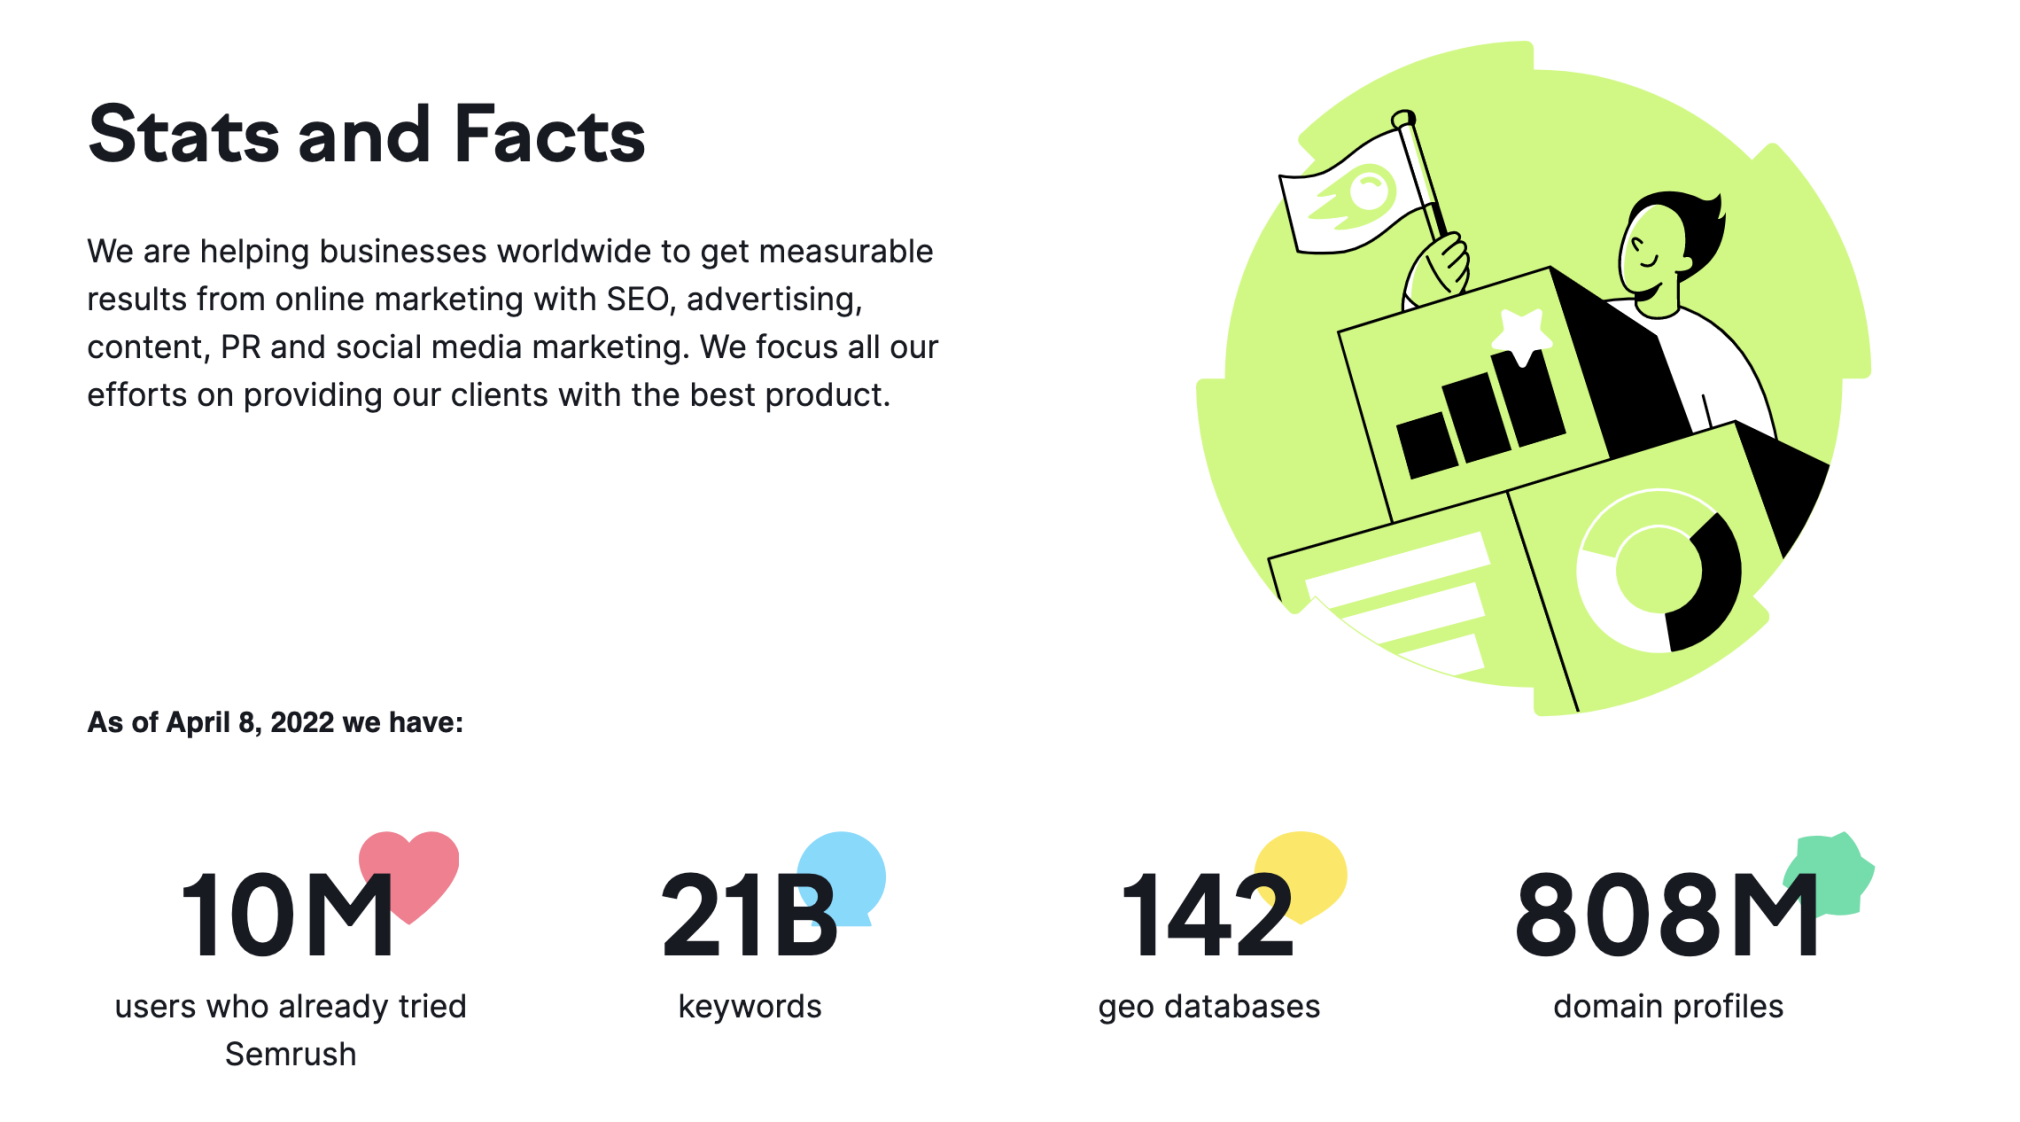 Semrush stats and facts